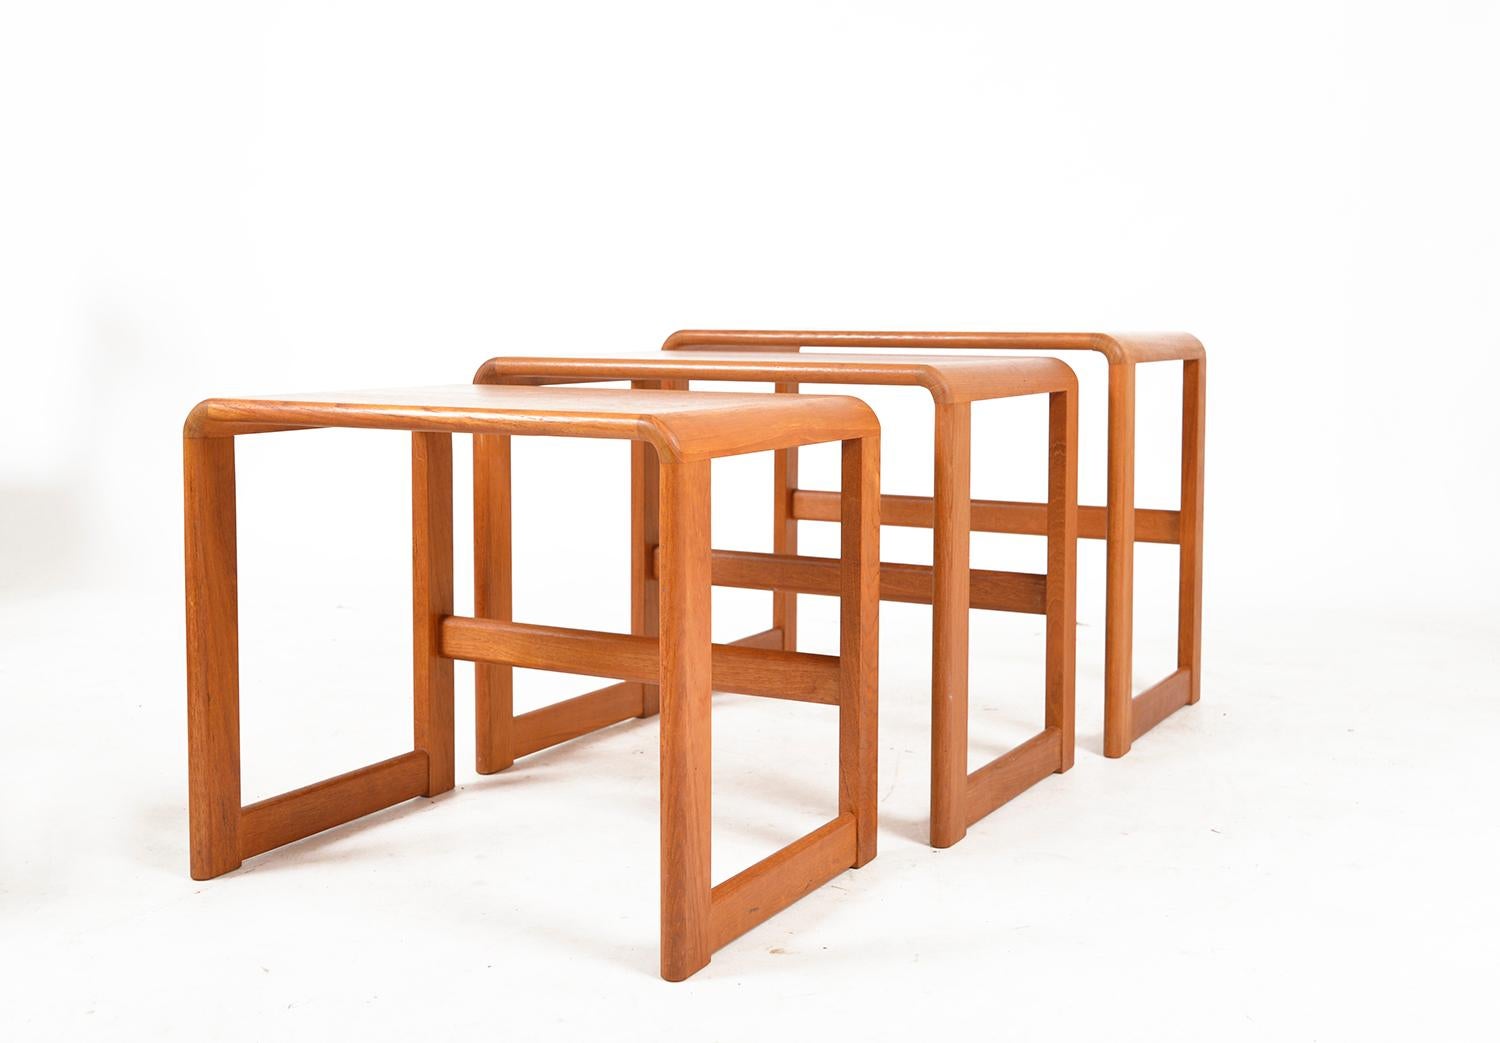 Midcentury Teak Nesting Occasional Tables by O'Donnell Design Irish 1970s Danish For Sale 6